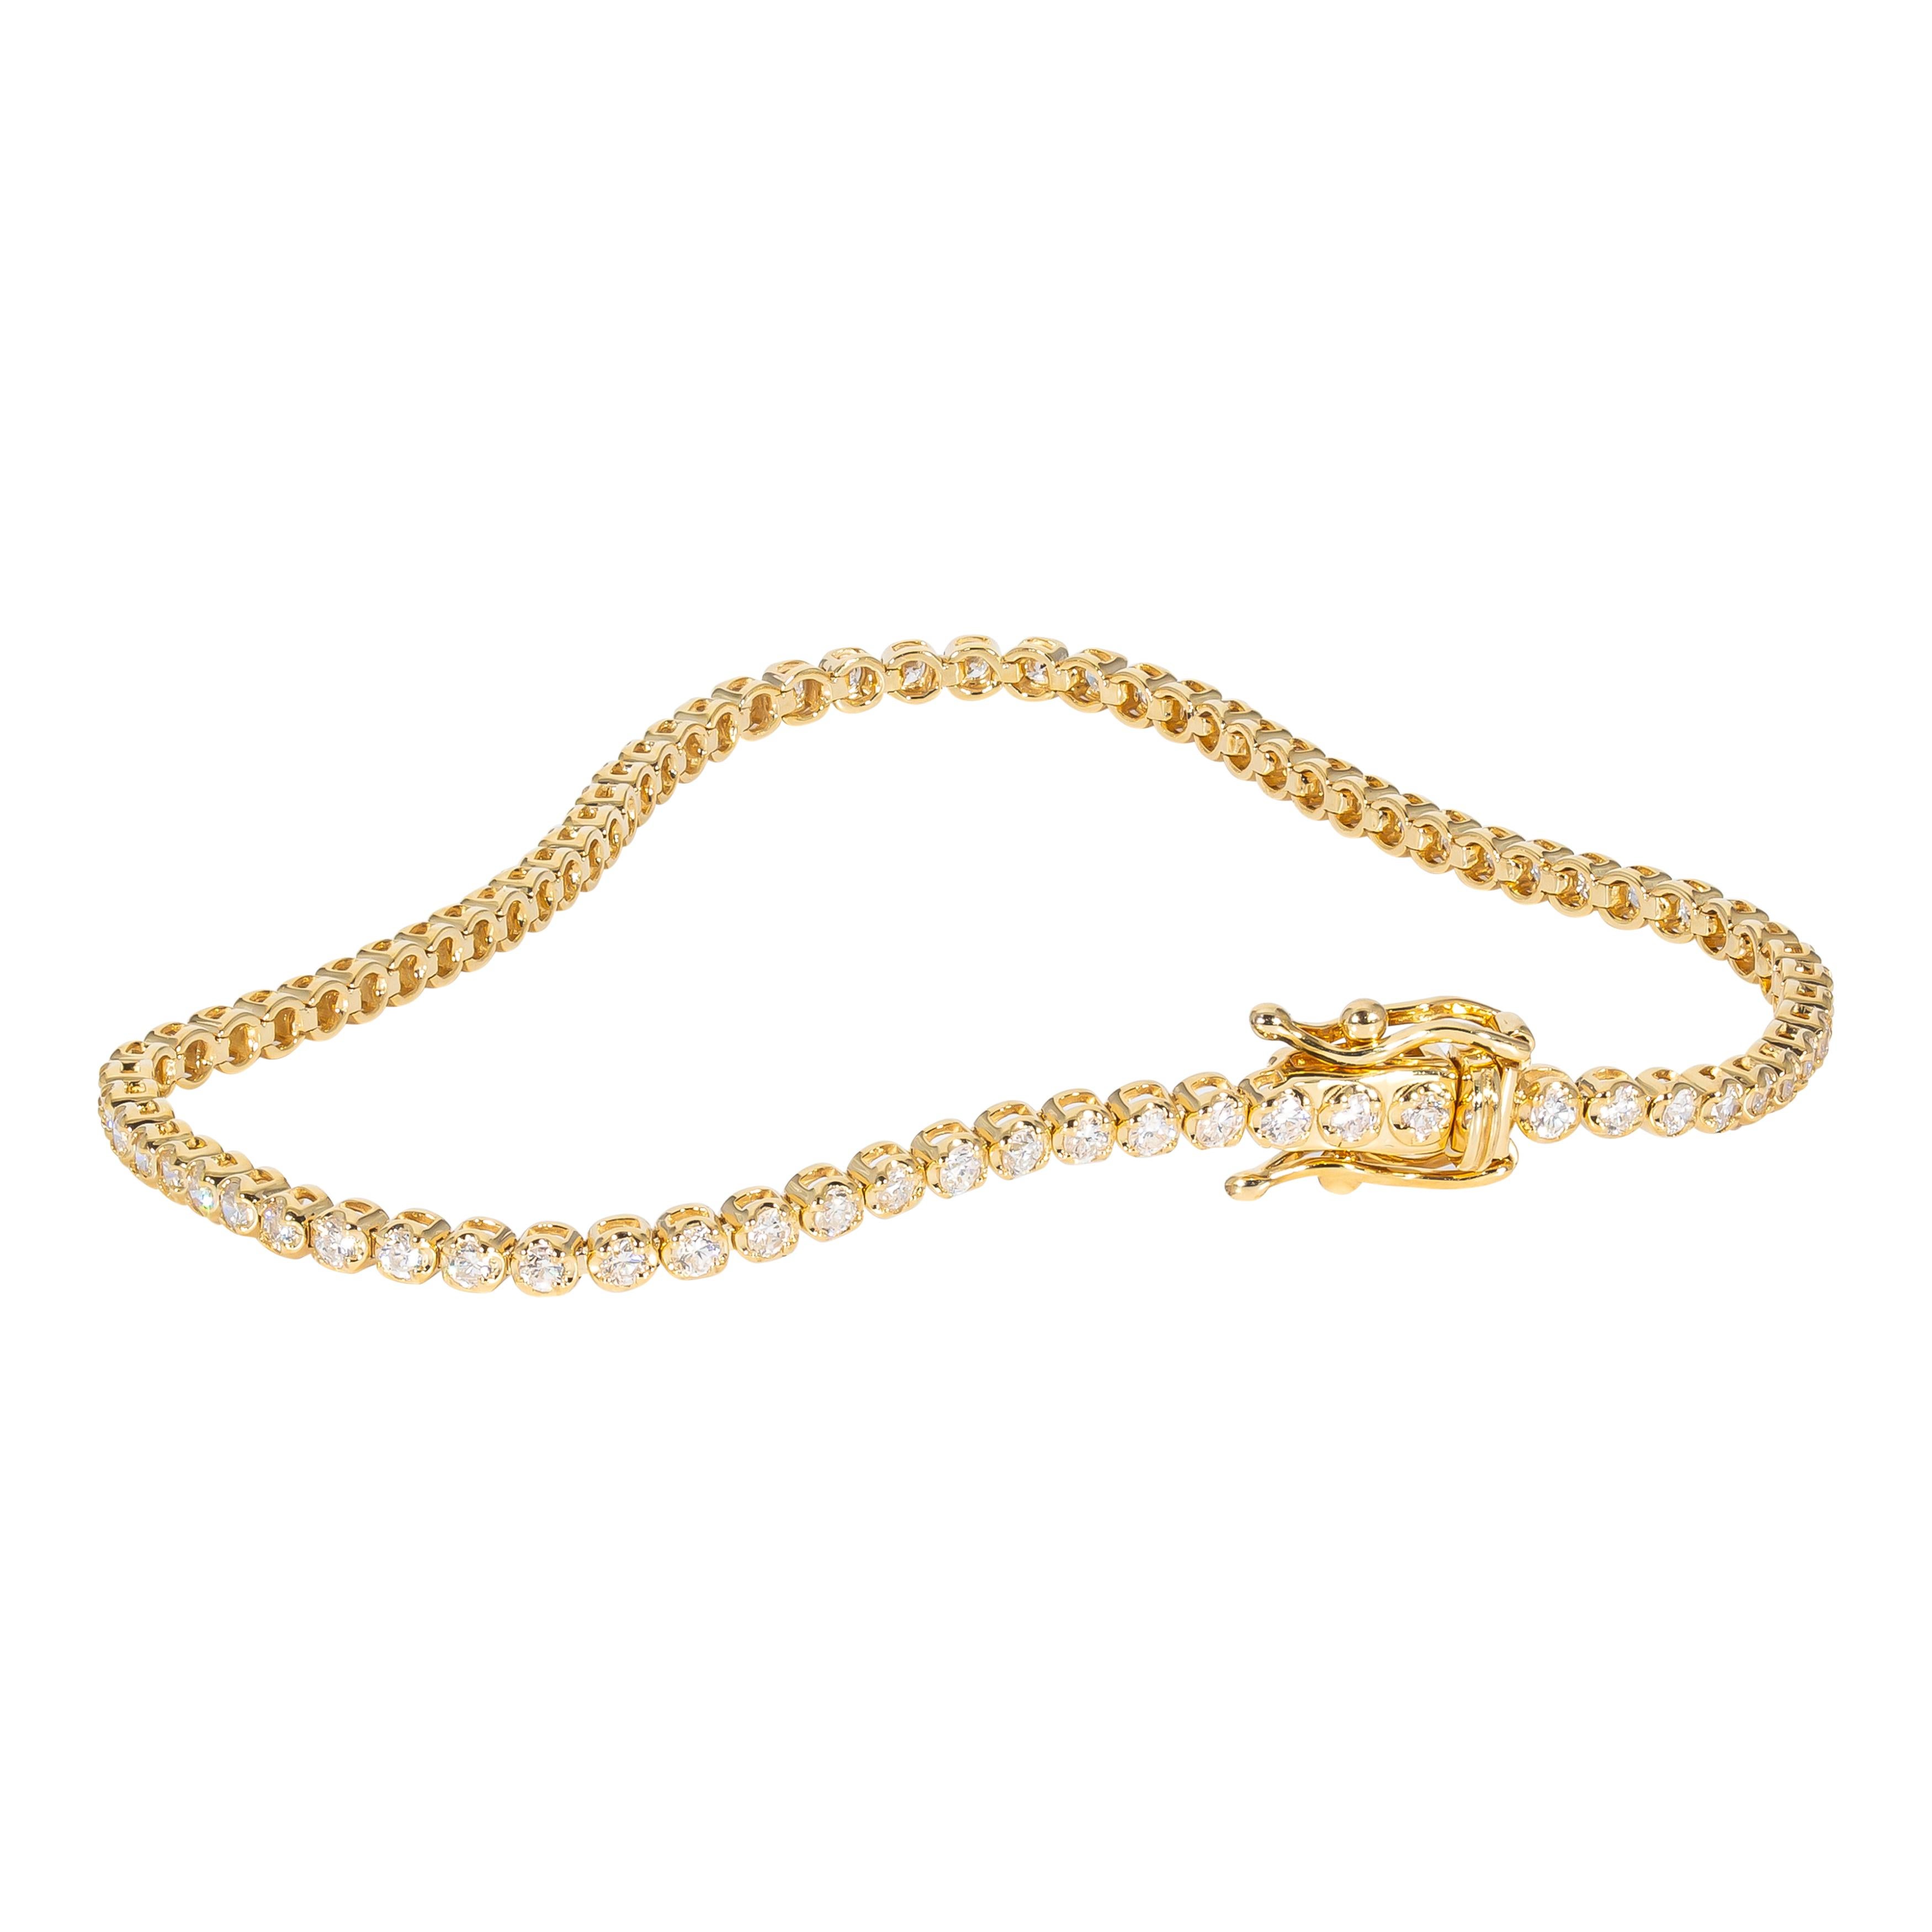 14k yellow gold bracelet containing prong set natural diamonds. The total weight of the diamonds is 1.35 carats. The color and clarity grades of the diamonds contained within the bracelet have been graded by our Graduate Gemologists as E-F, VS1-SI1,